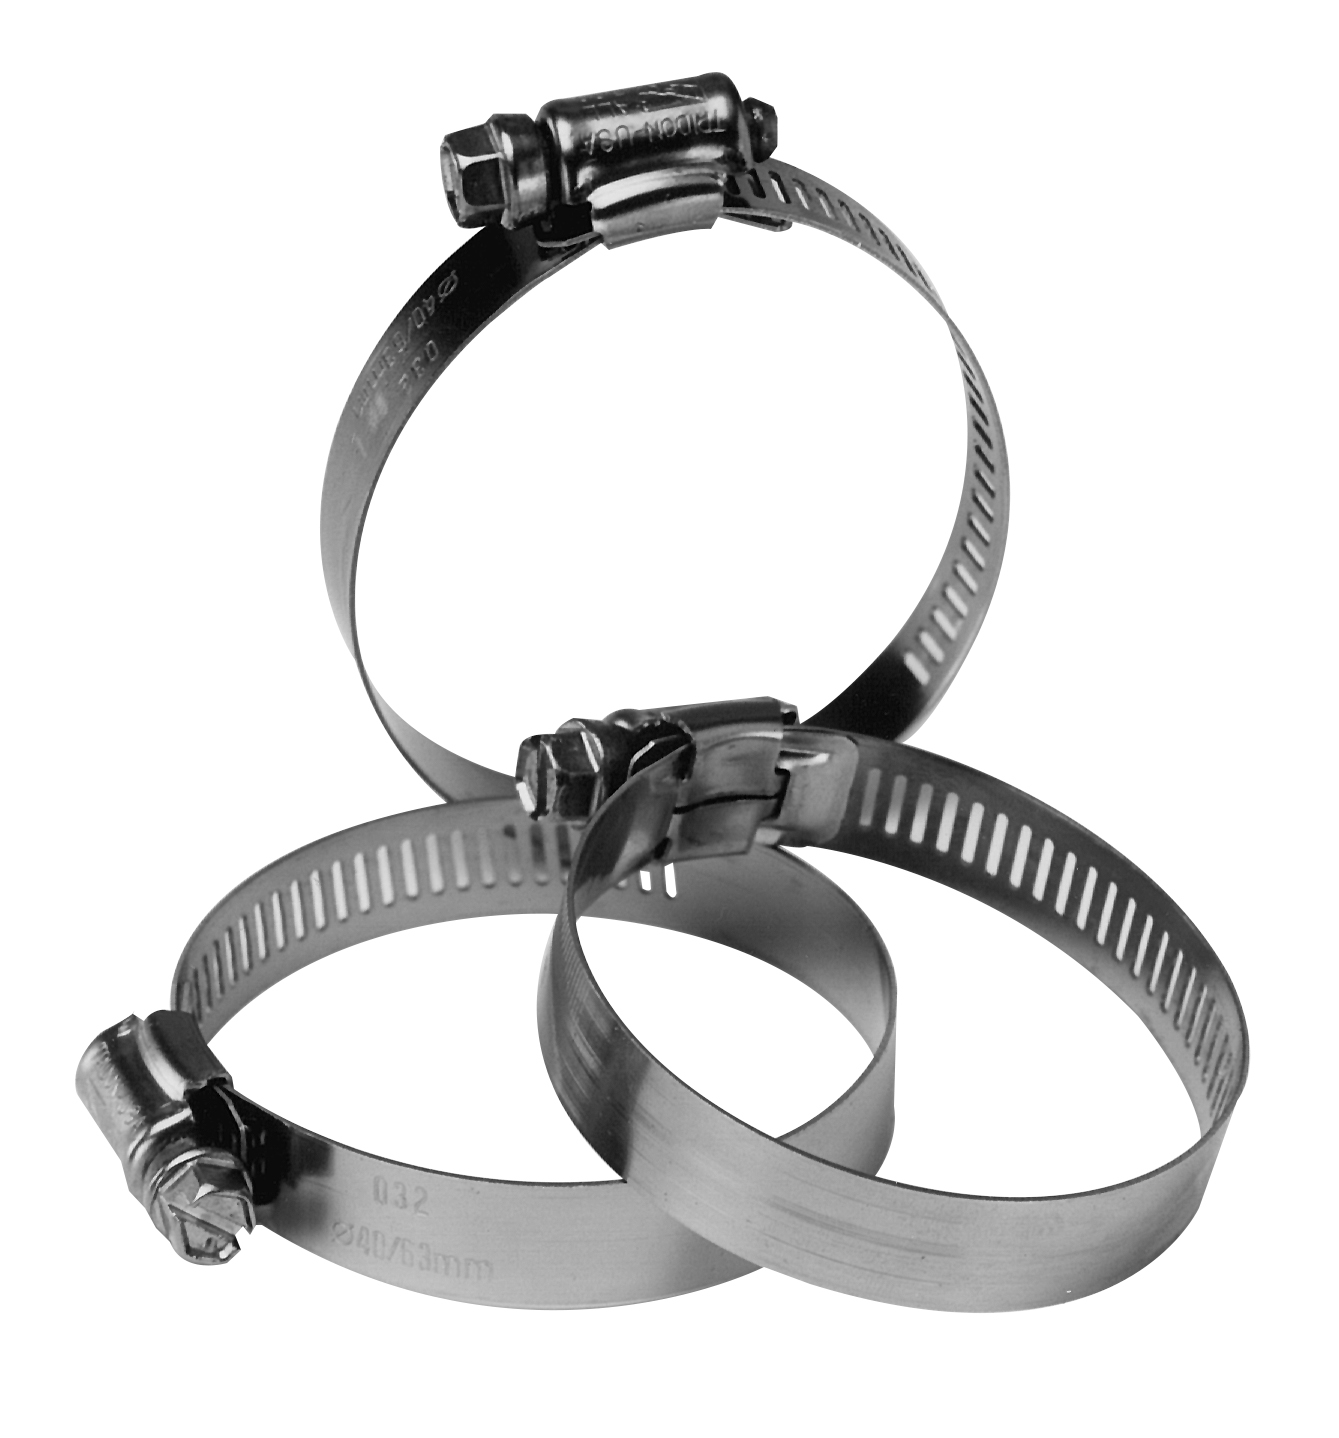 79314 3/4-1 1/2 SIZE 16 HOSE CLAMP (10) - Clamps and Hangers